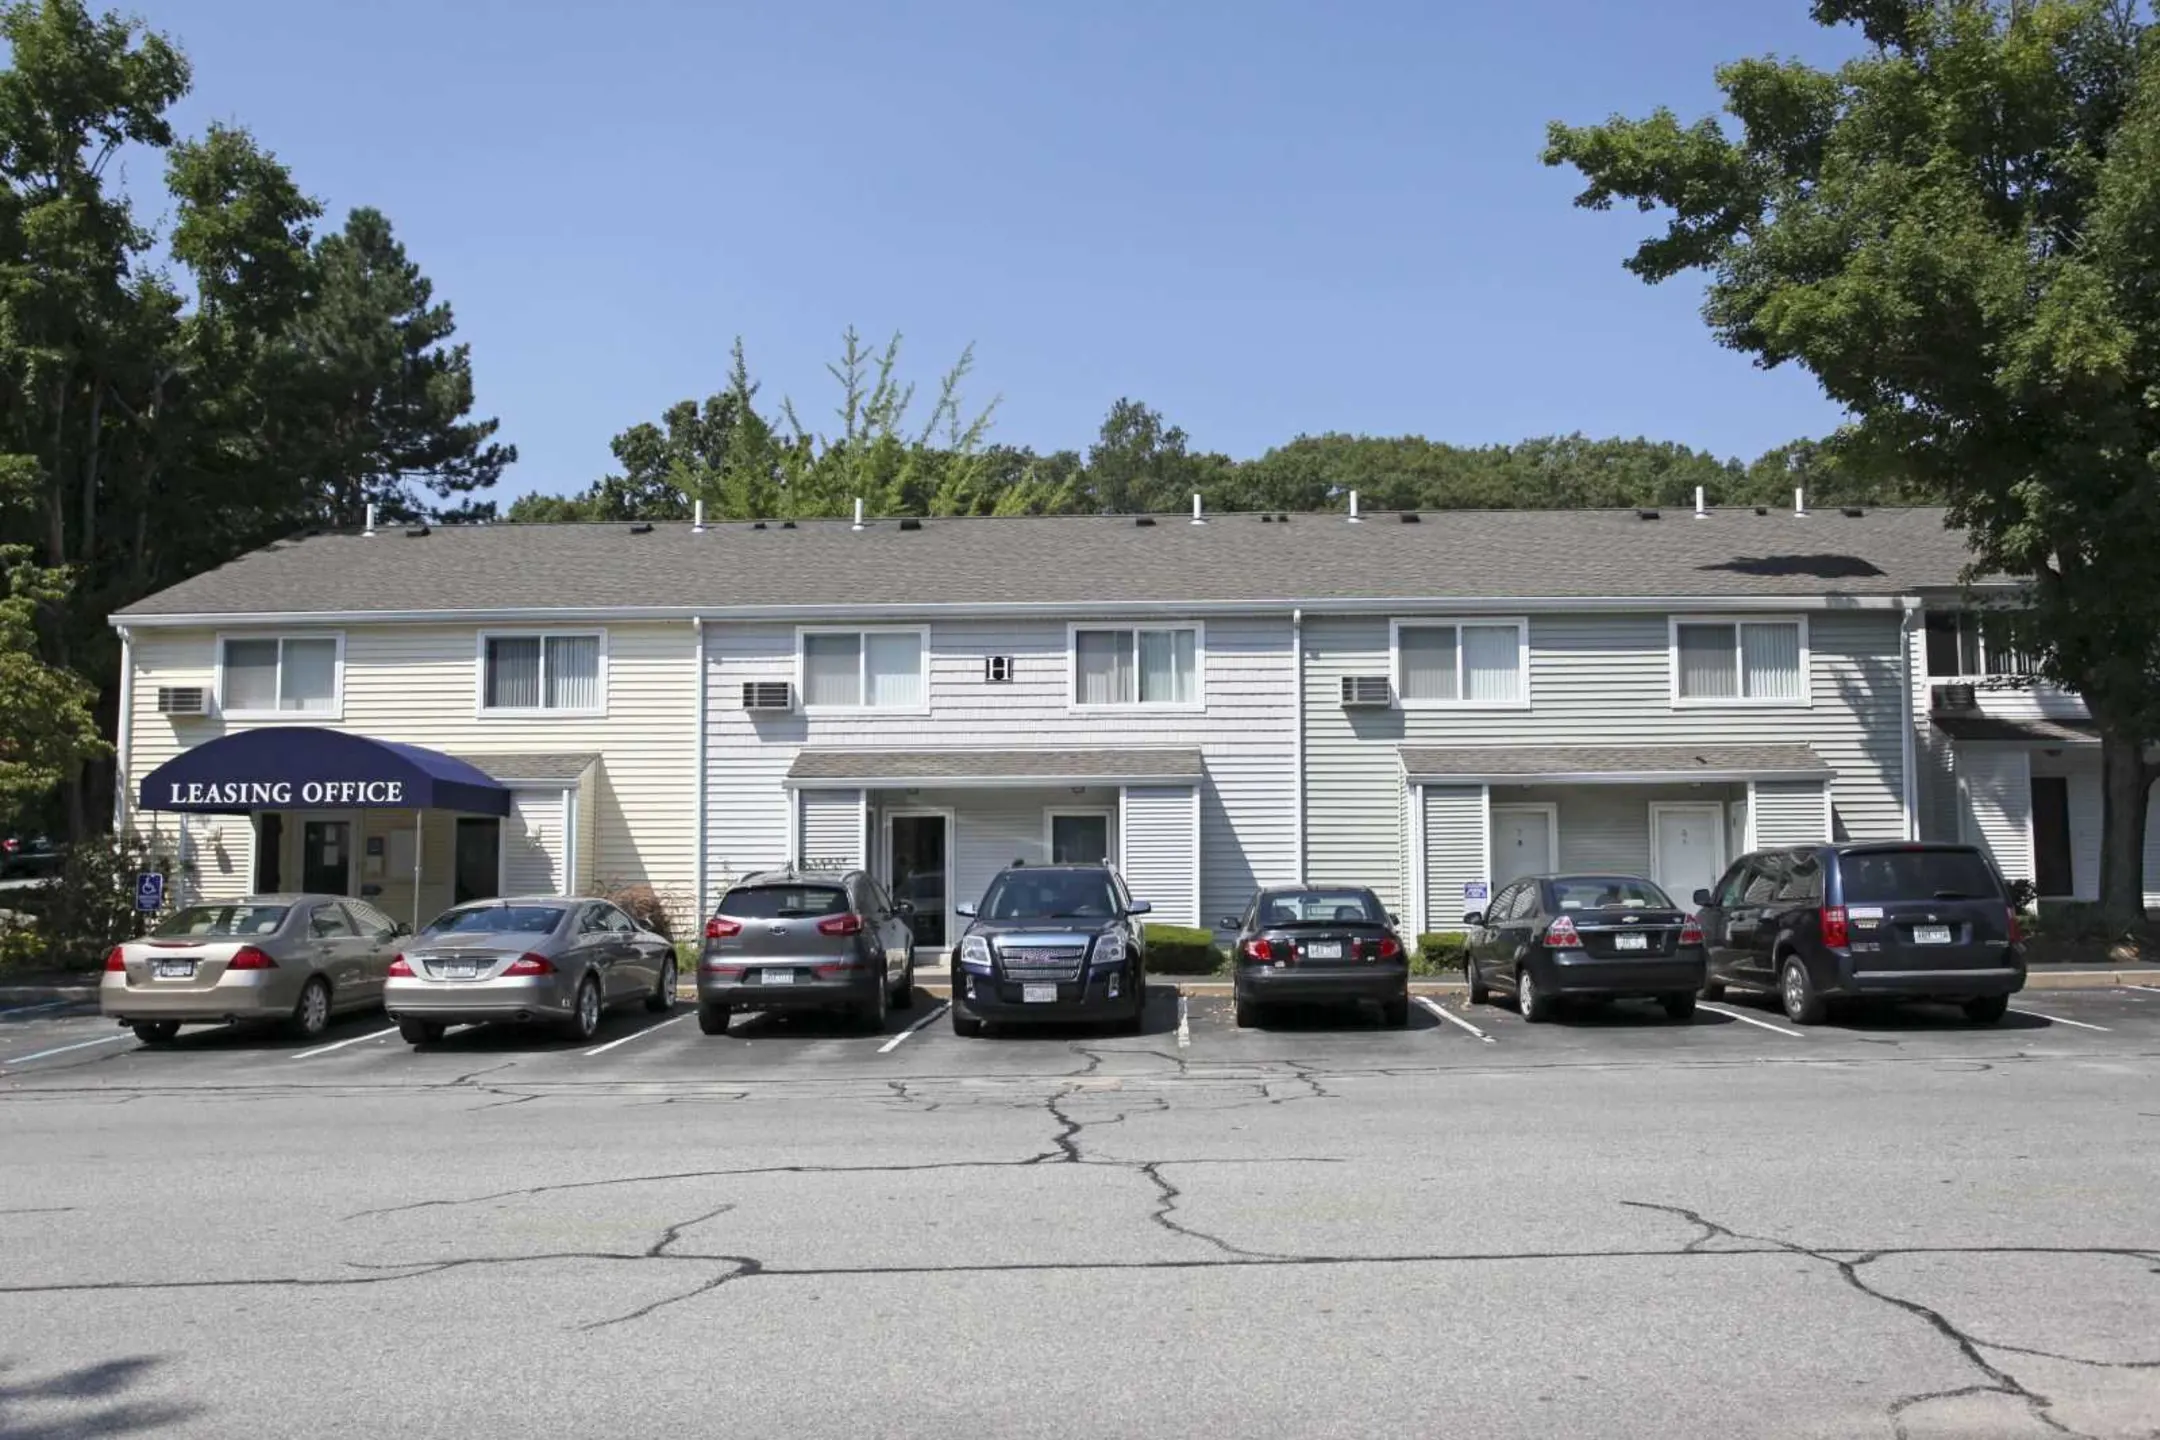 Leasing Office - Shorewood Apartments - North Providence, RI